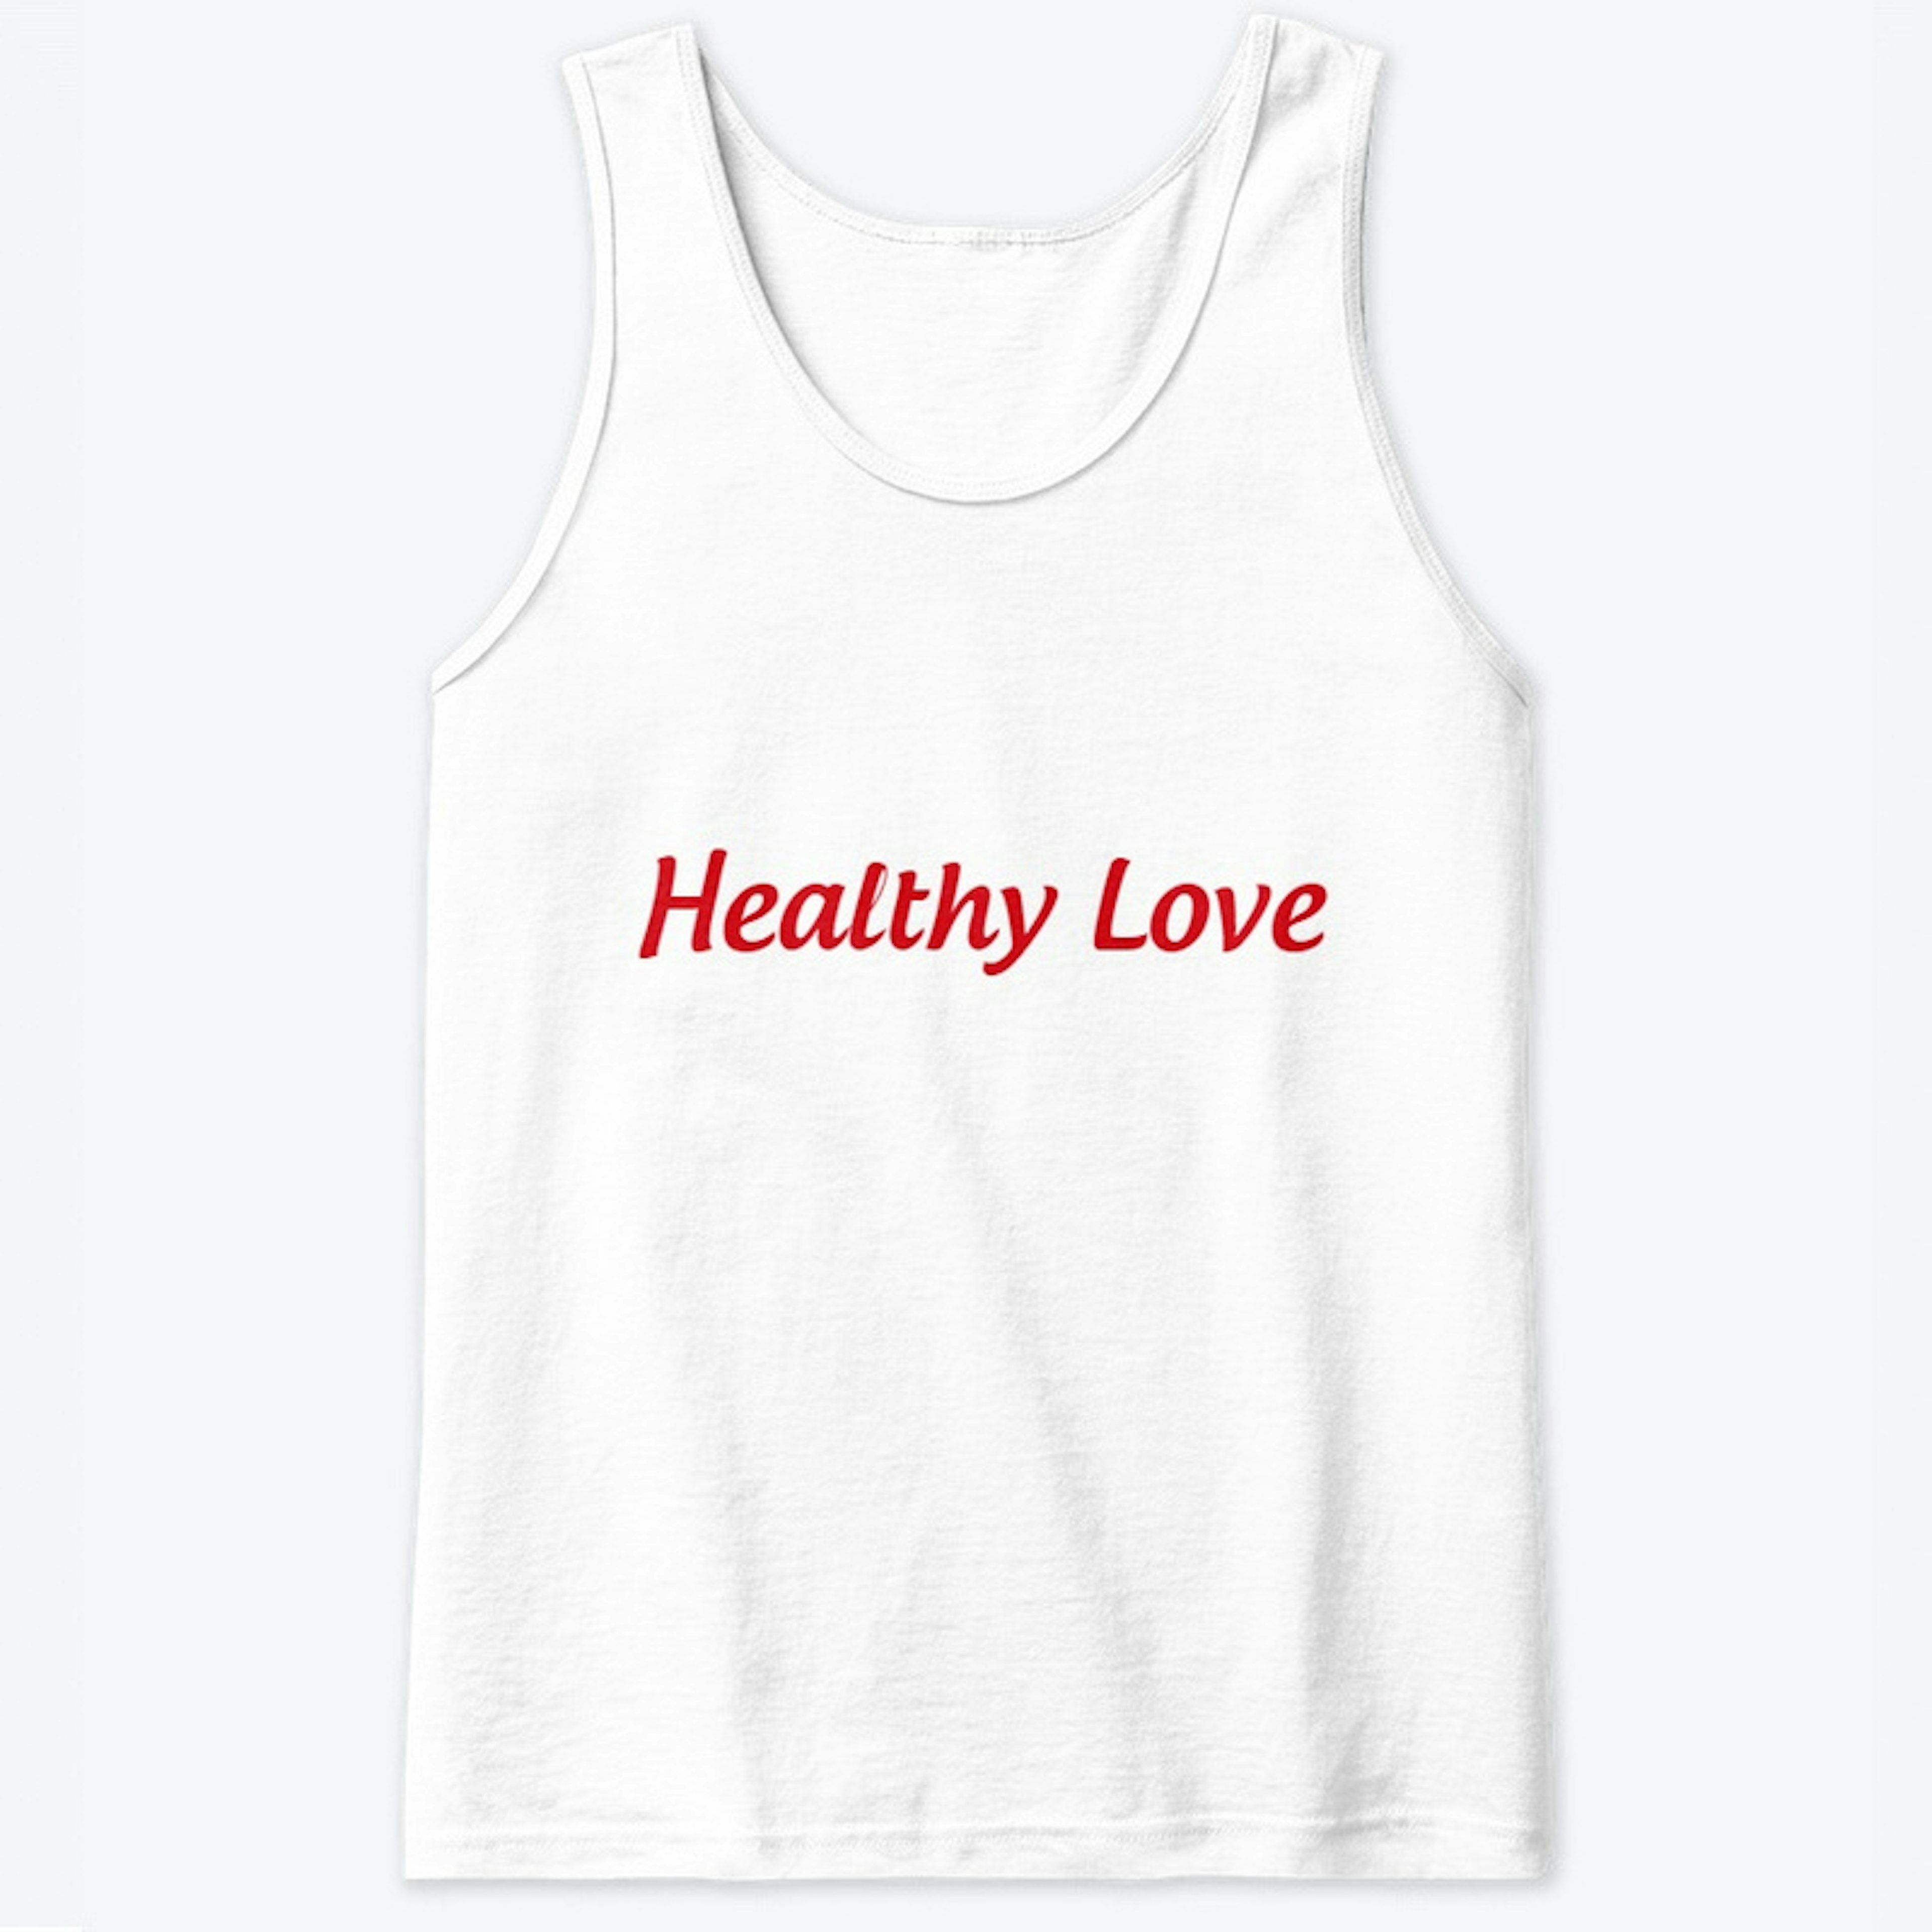 Healthy Love collection clothing